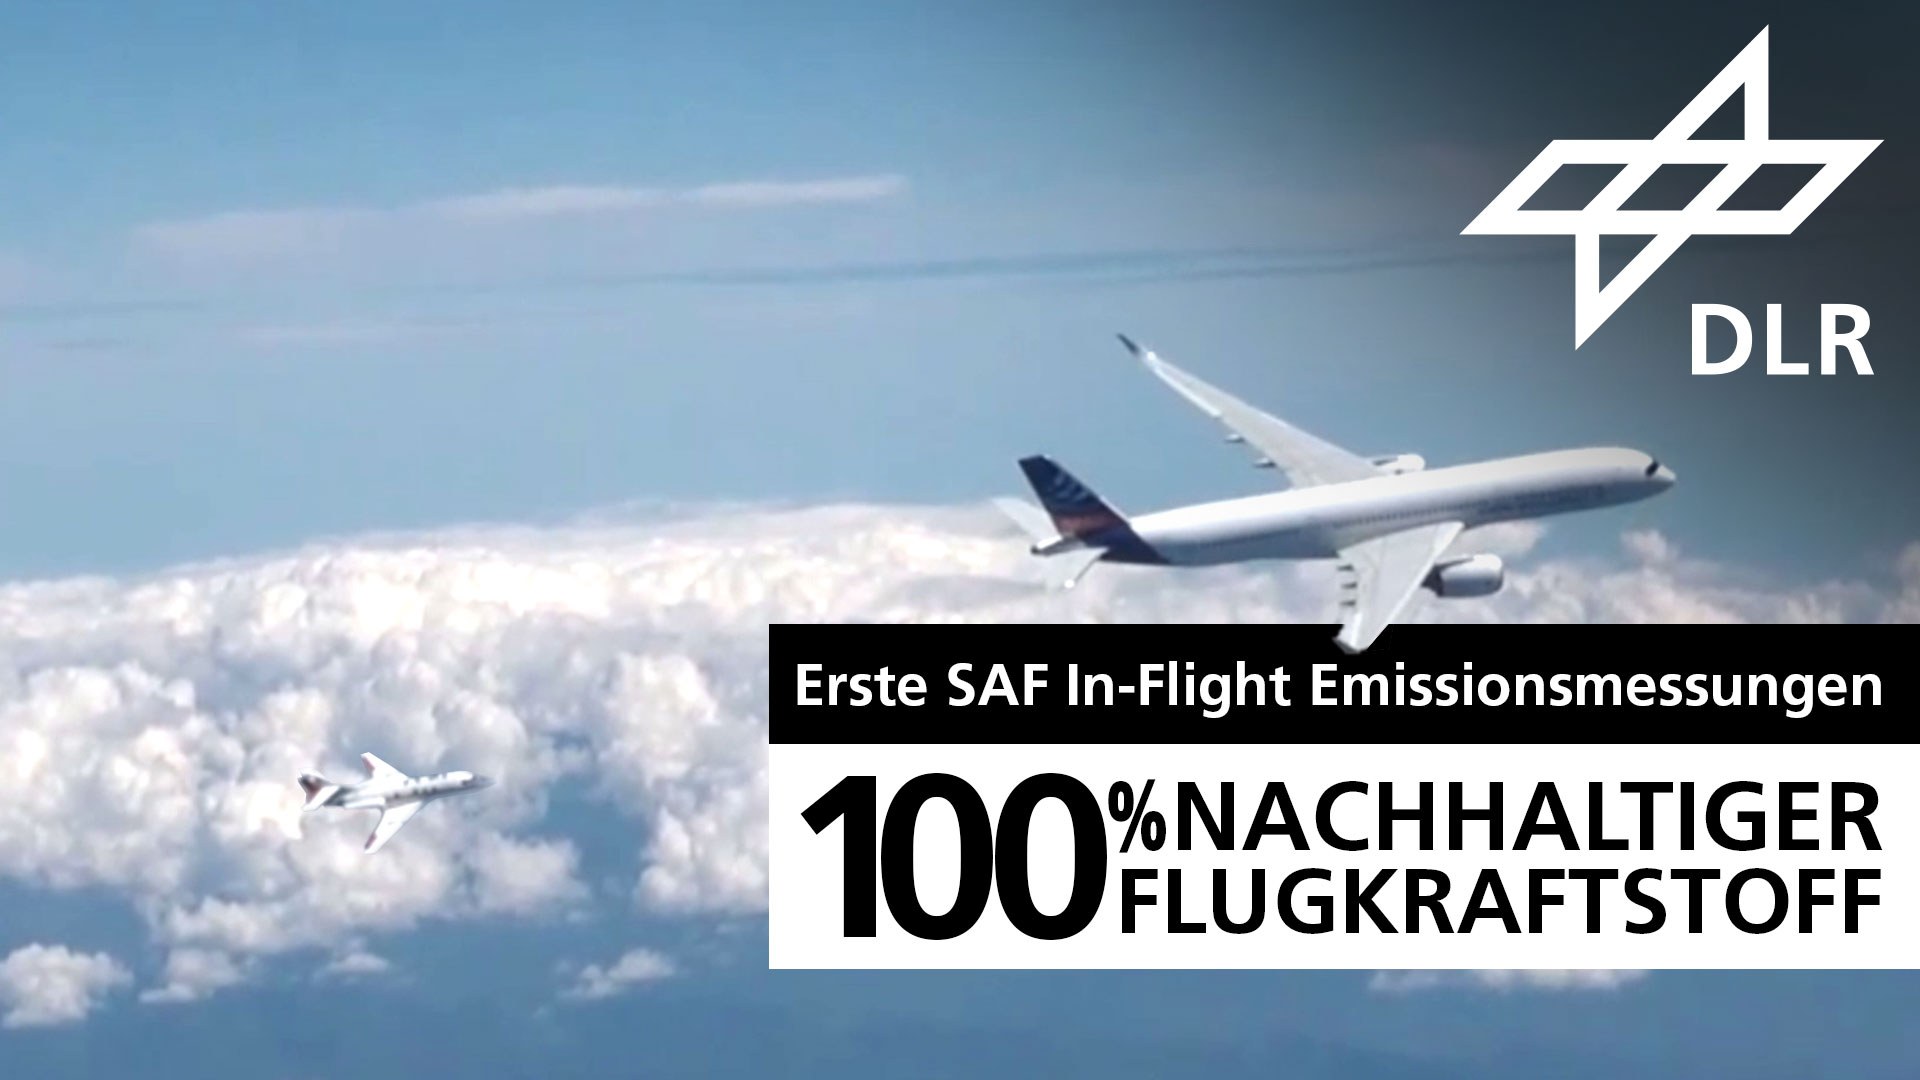 Video still – First in-flight emission measurements of 100 per cent sustainable aviation fuel